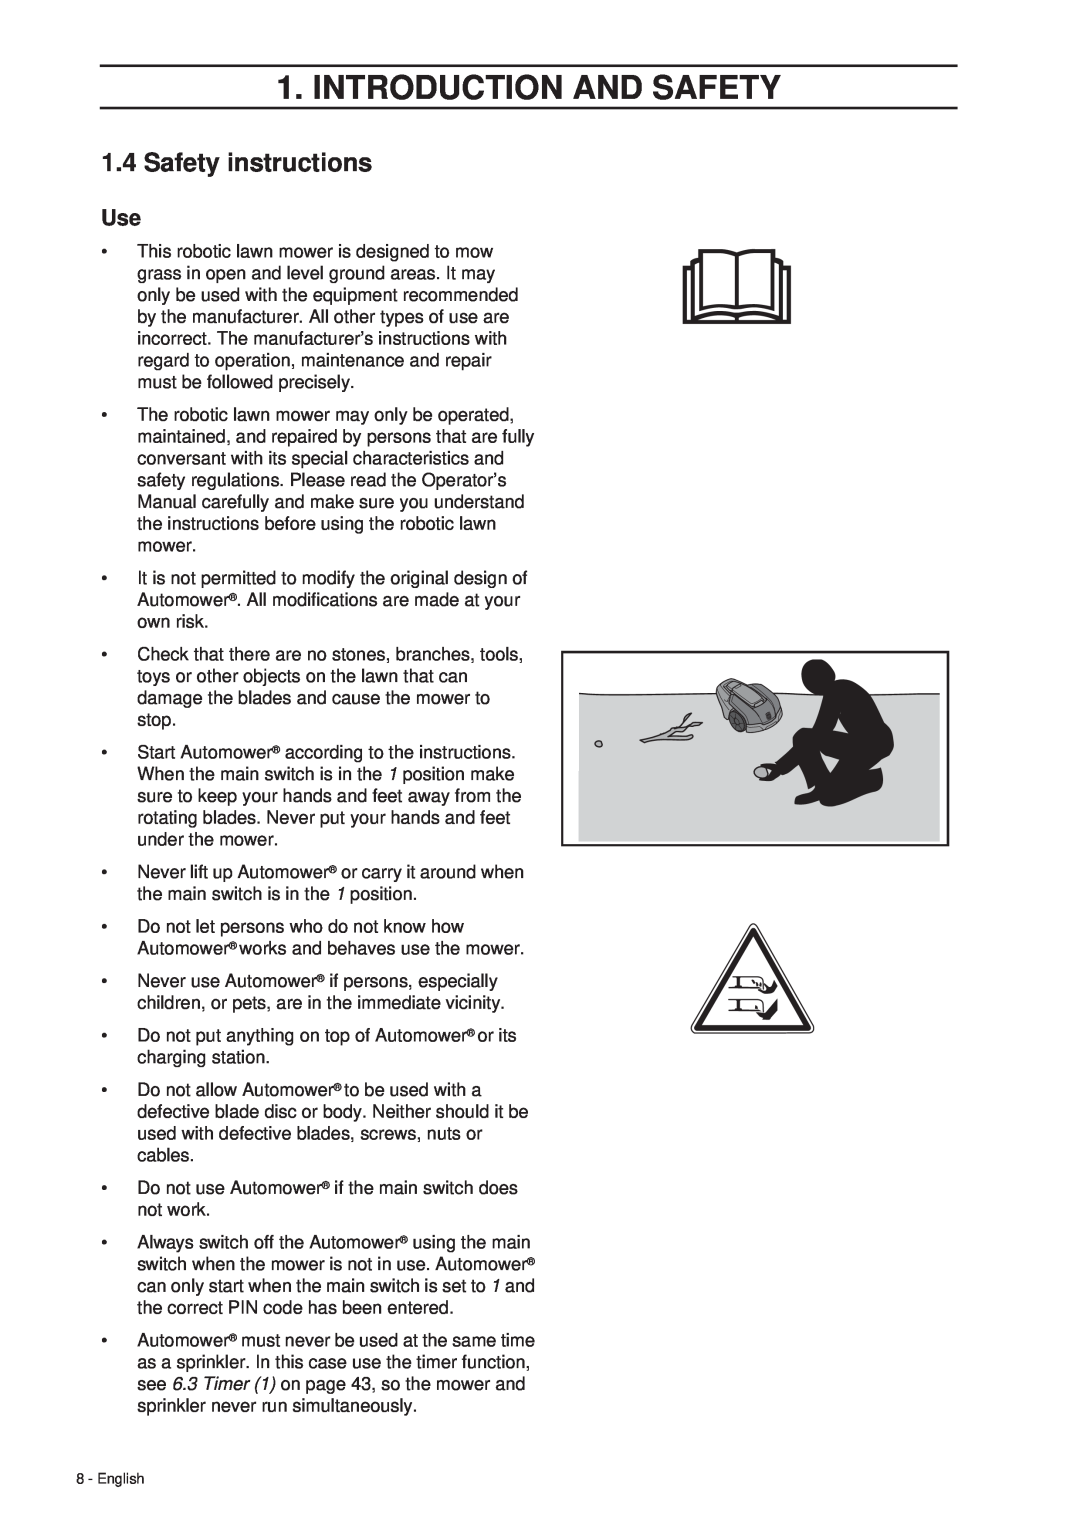 Husqvarna 305 manual 1.4Safety instructions, Introduction And Safety 